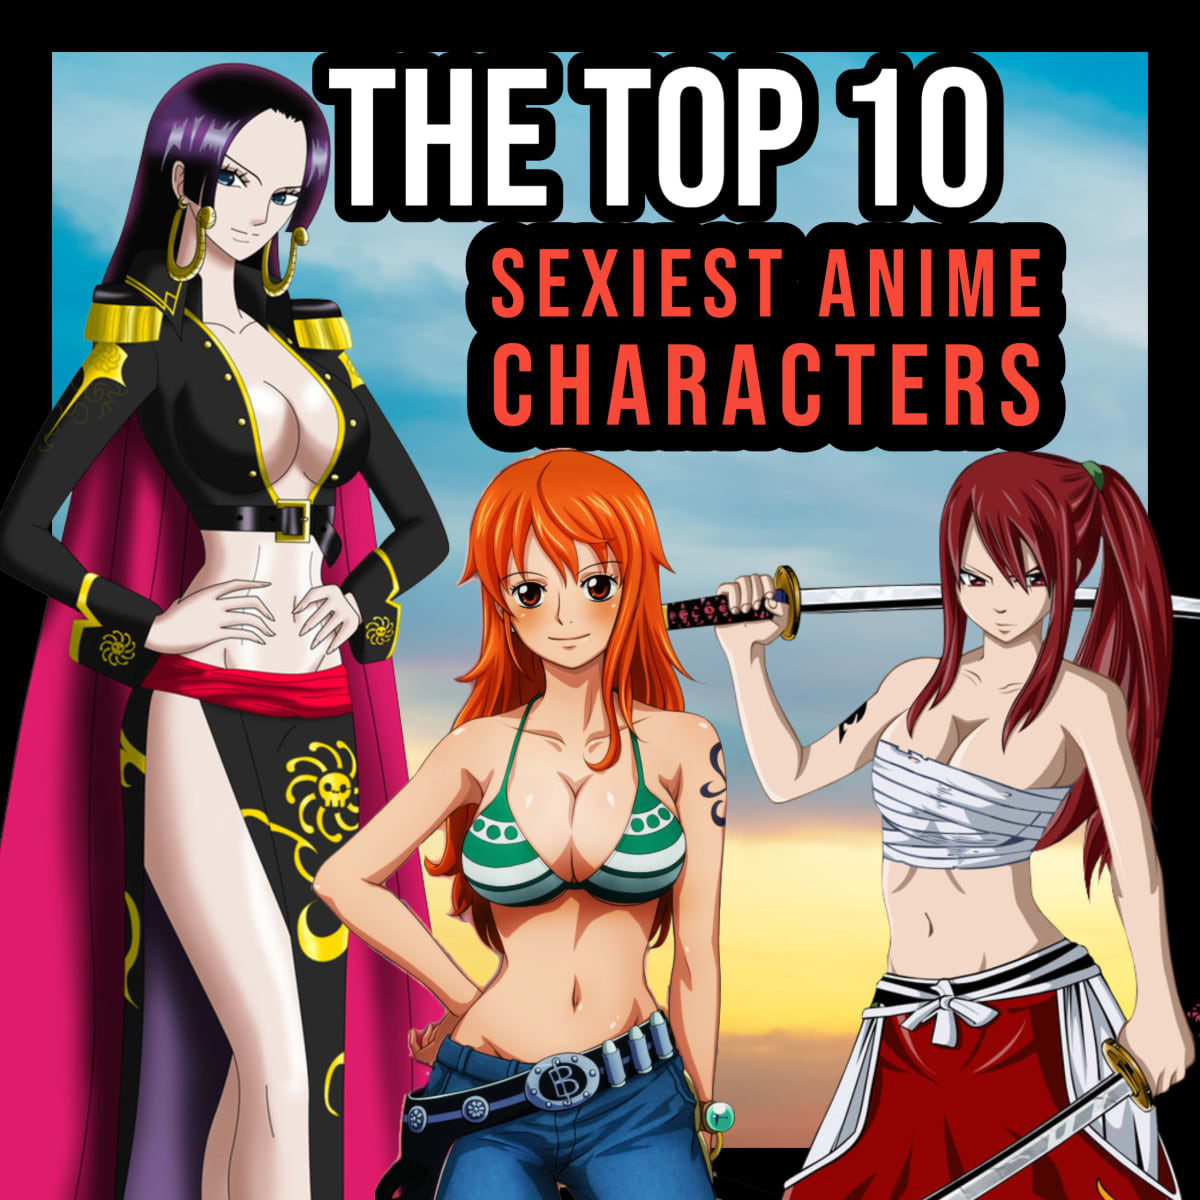 The Top 10 Sexiest Anime Characters - ReelRundown